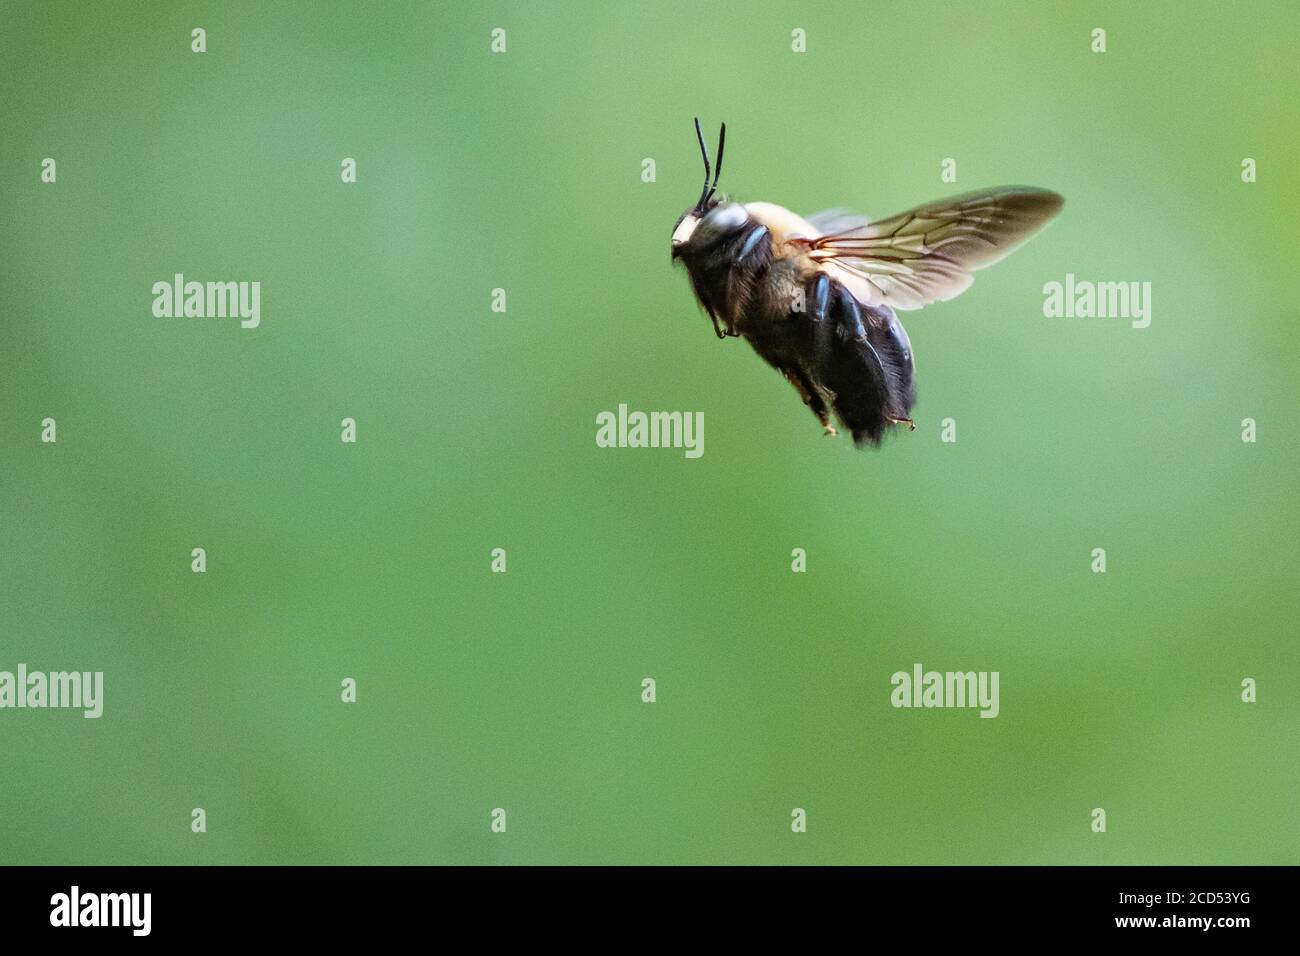 Carpenter bee hovering Stock Photo